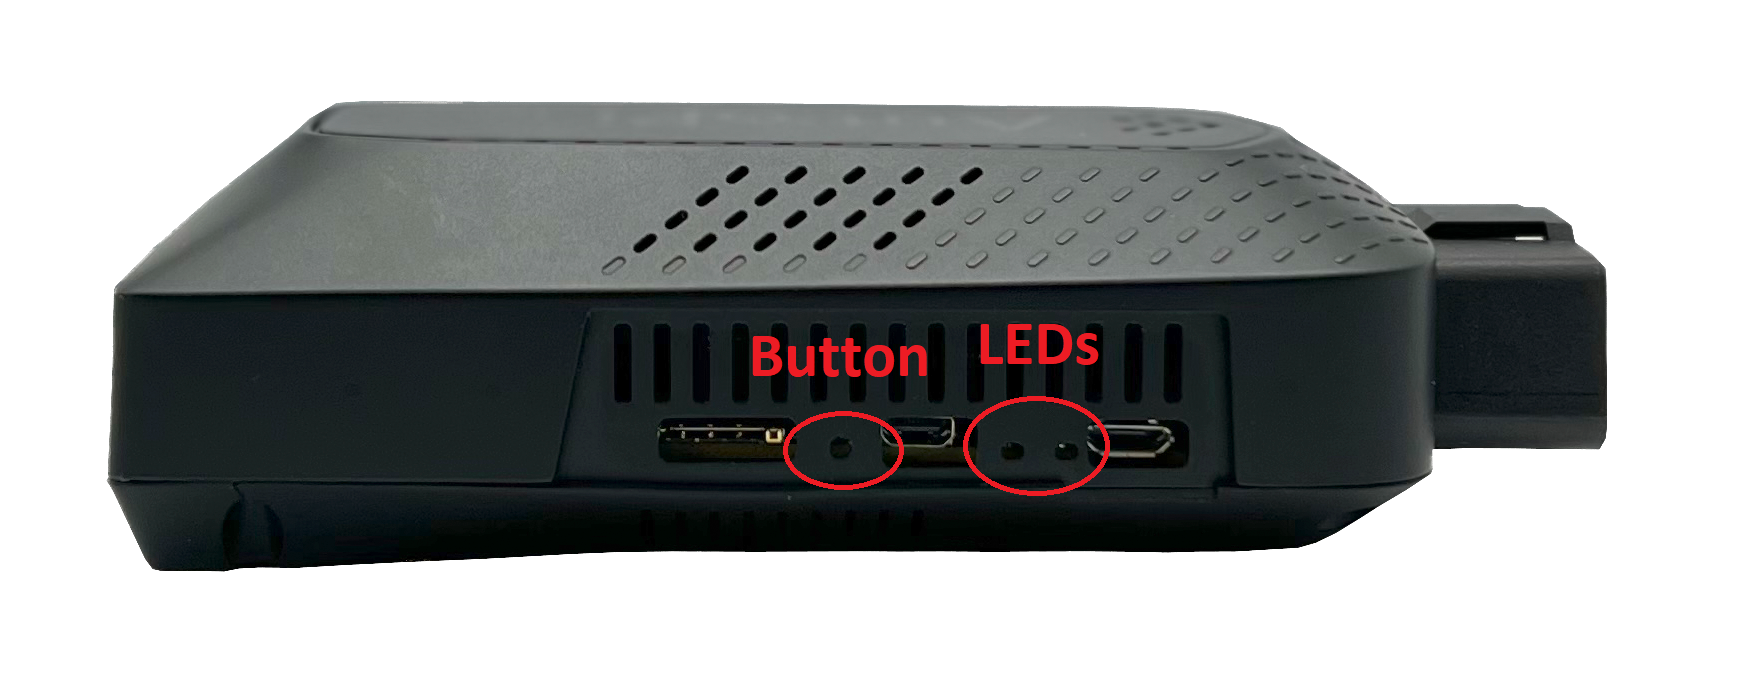 LED and Button location